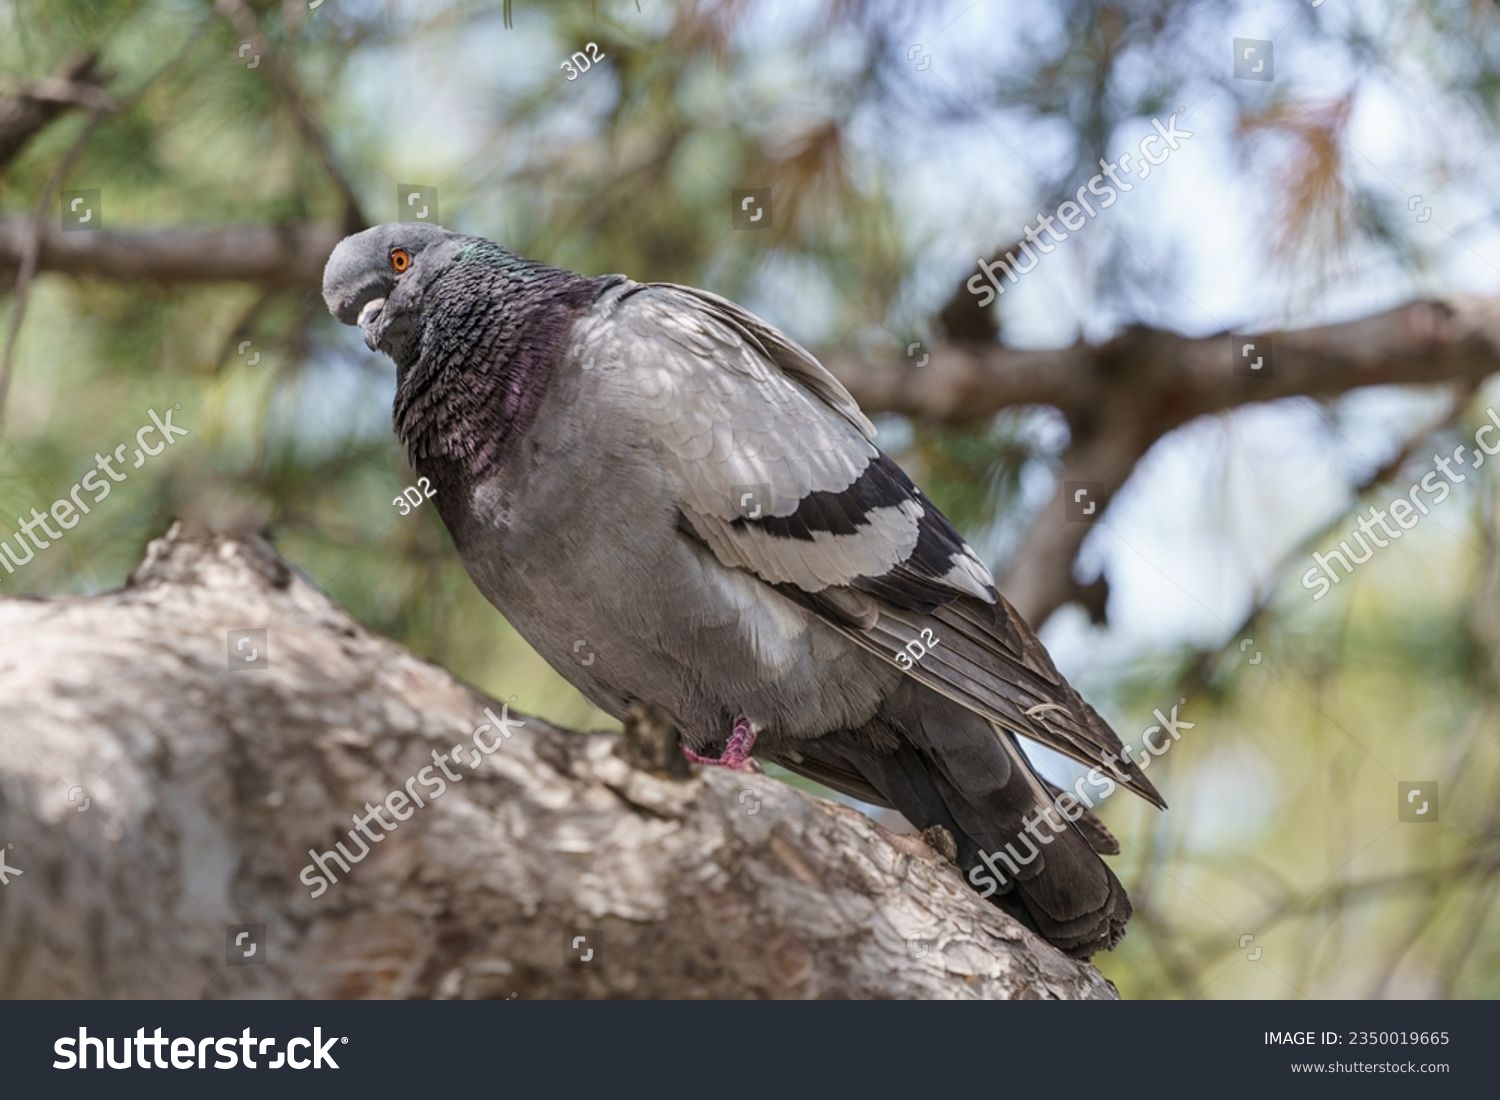 An ordinary pigeon hiding in the shade of a tree on a hot day. #2350019665